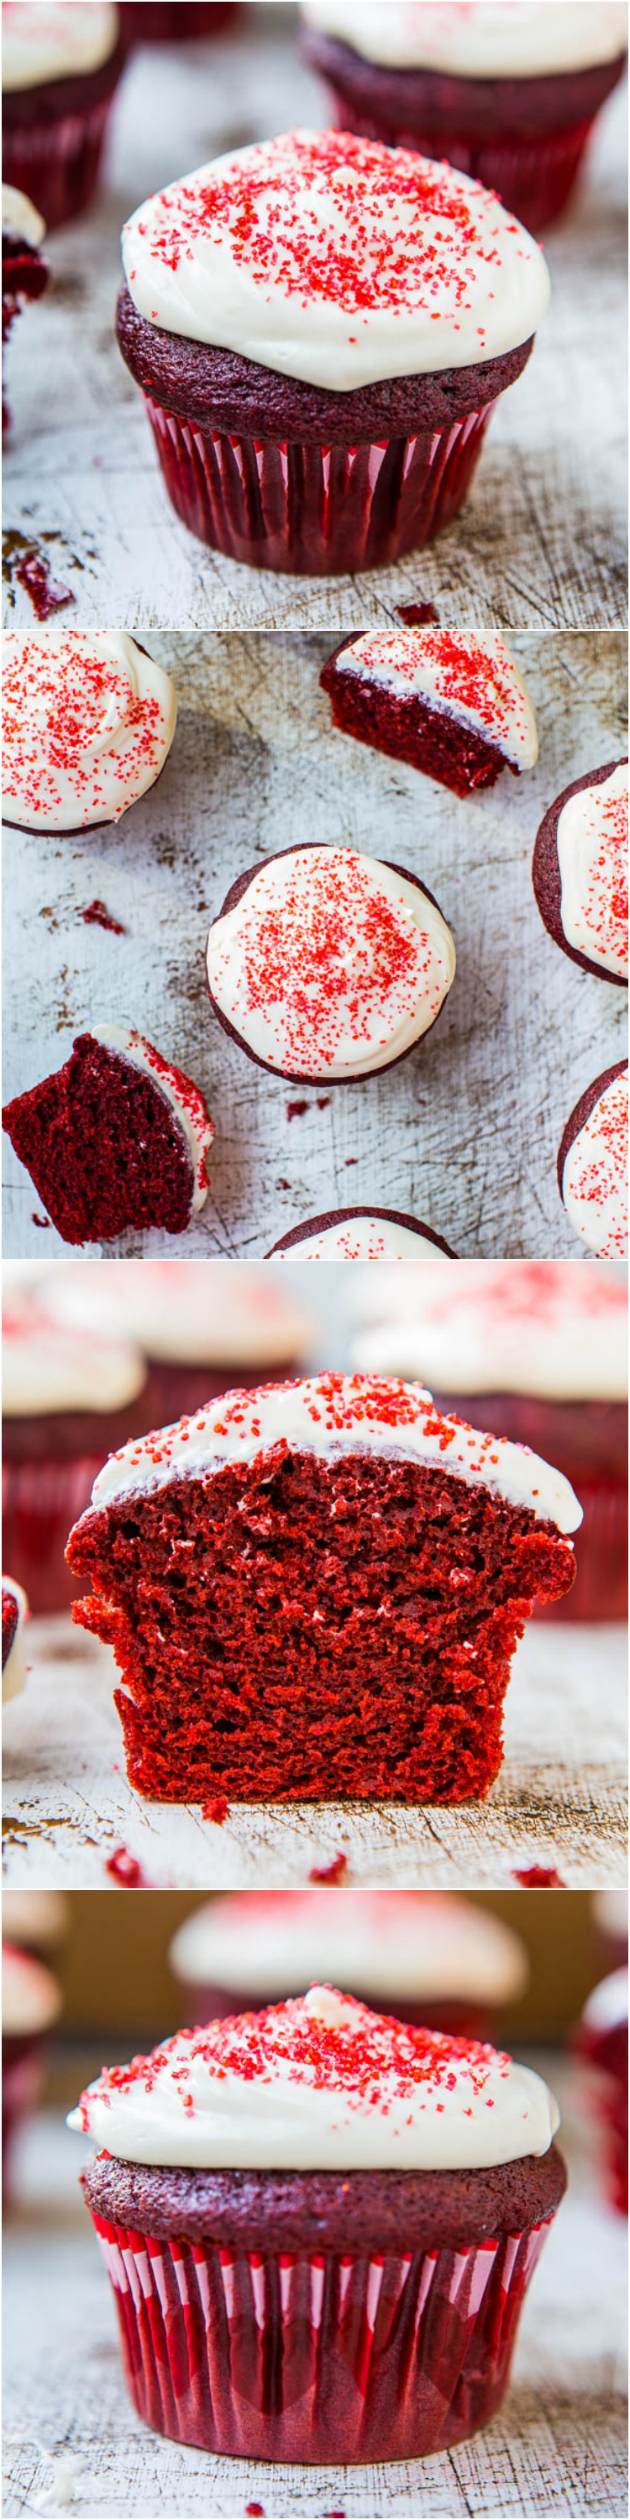 Red Velvet Cupcakes with Vanilla Cream Cheese Frosting {From Scratch} - Made in 1 bowl, no mixer & the cupcakes taste like they're from a bakery! Easy recipe at averiecooks.com